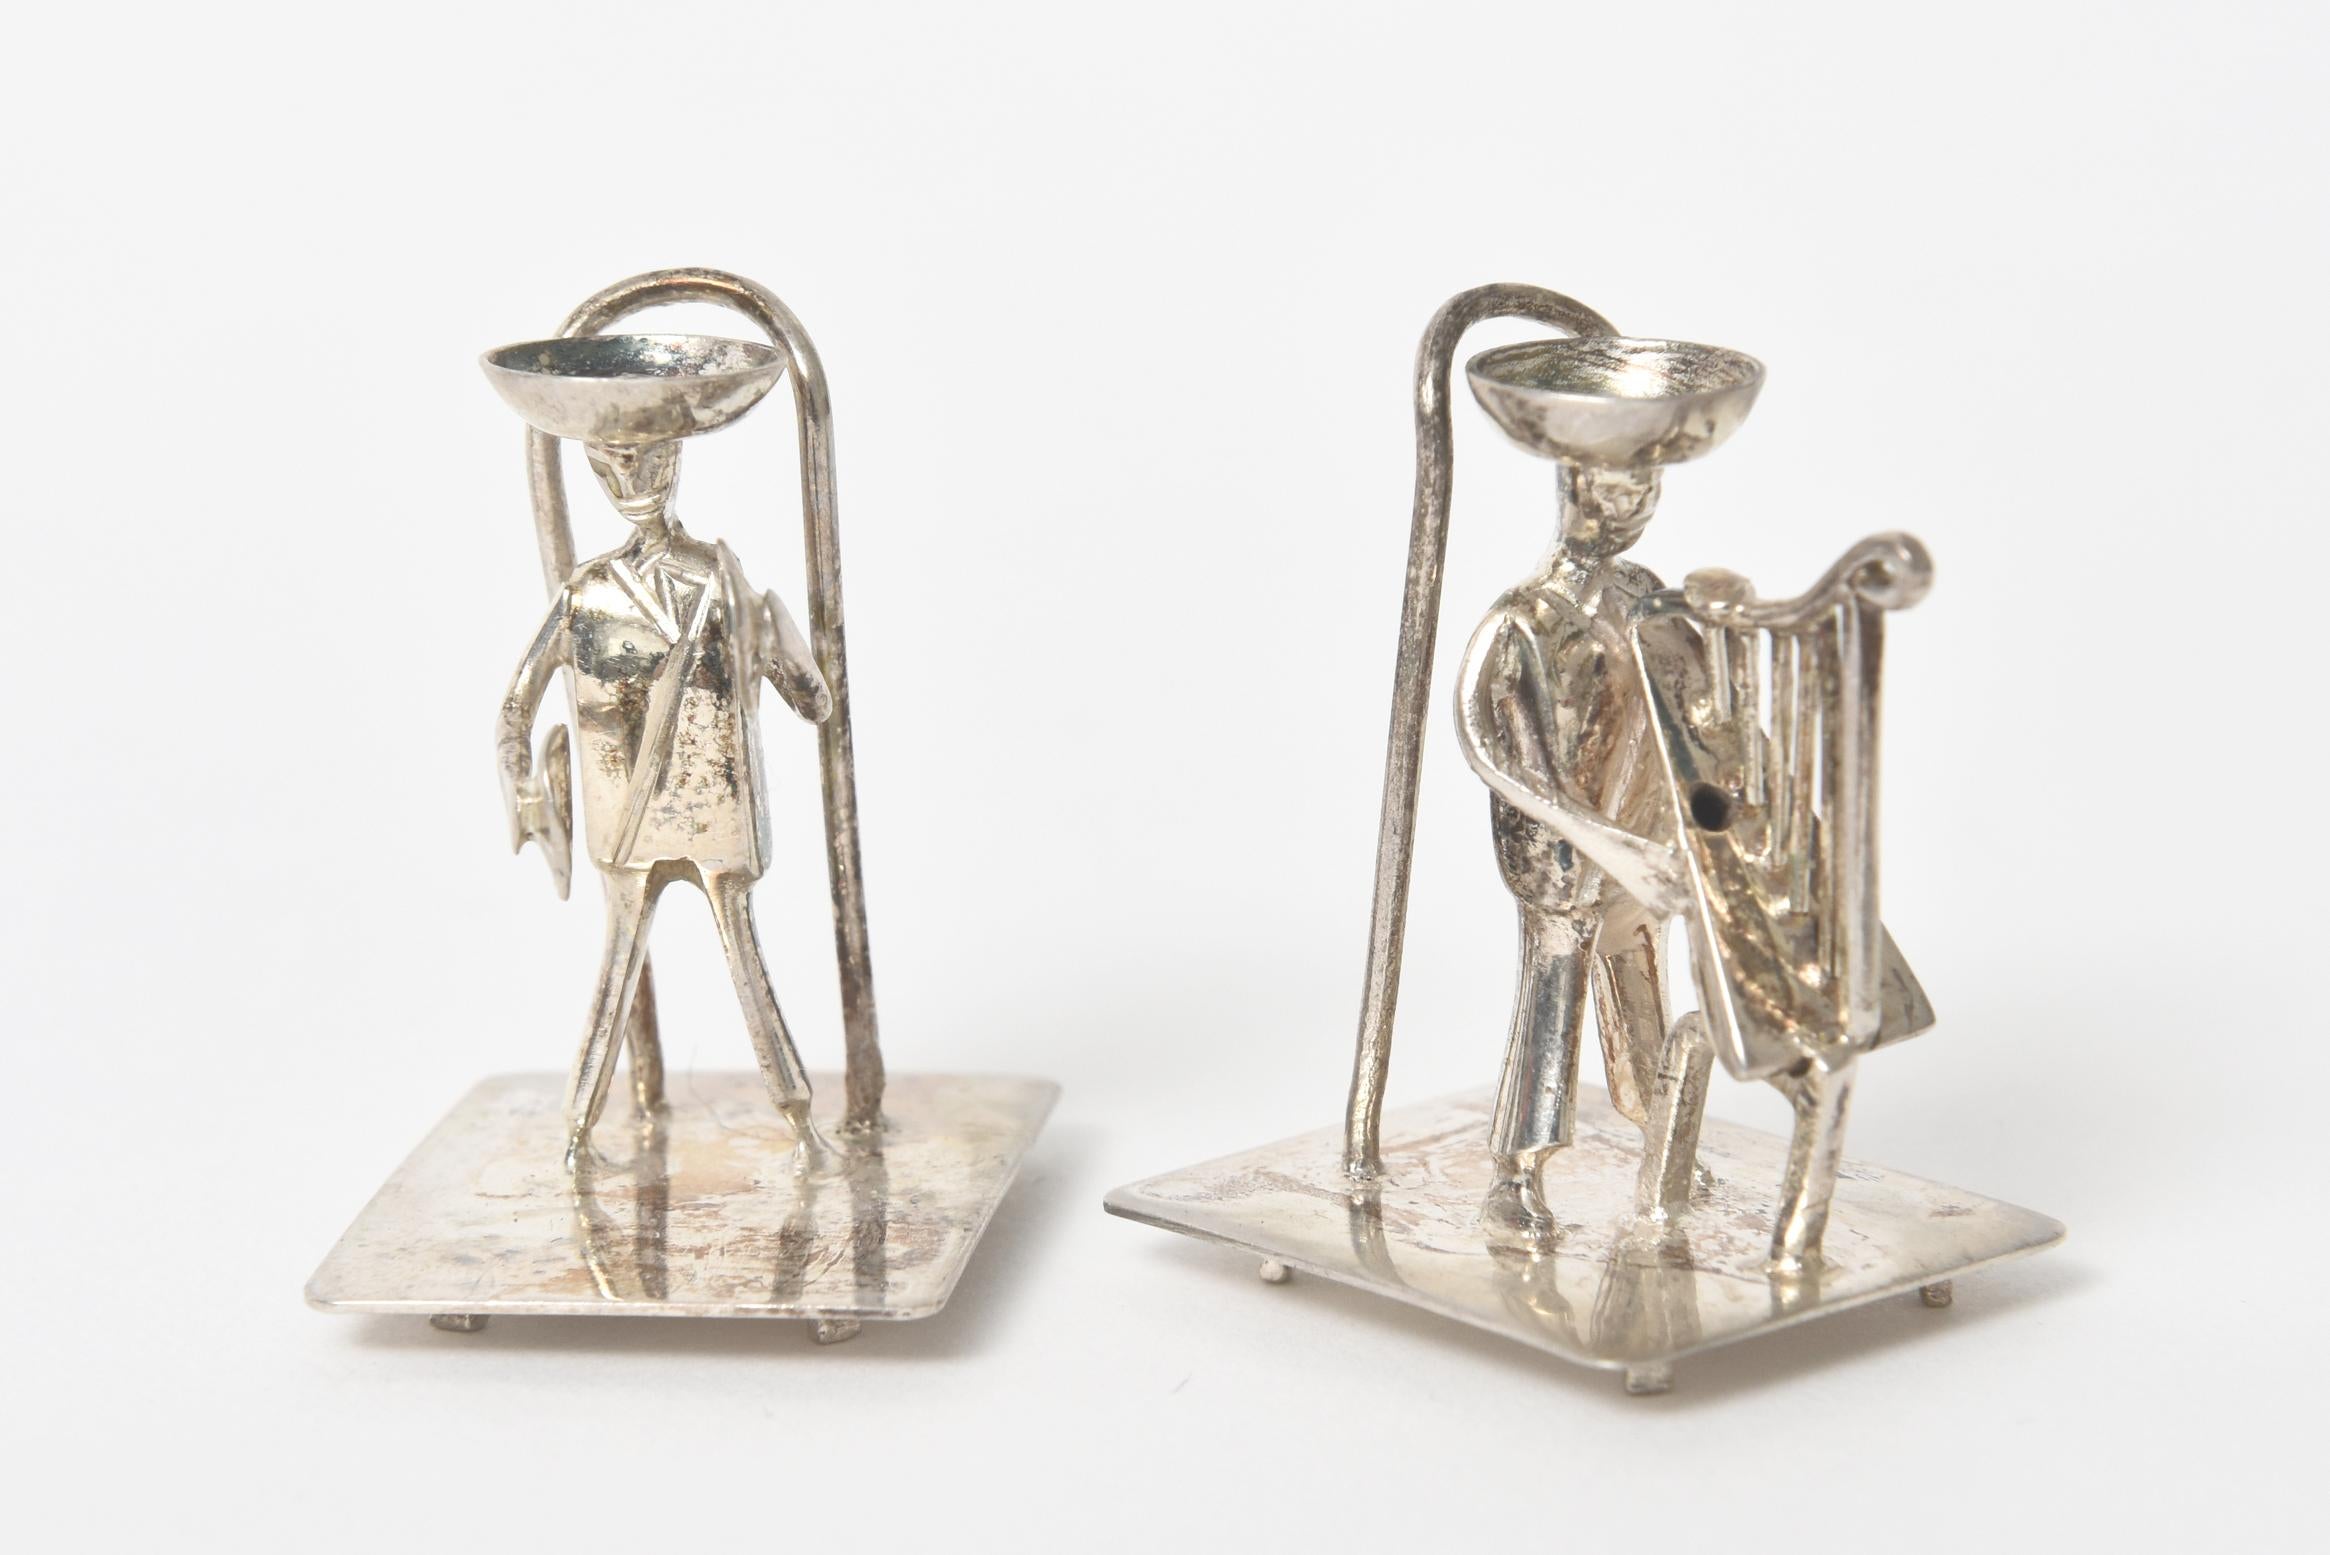 Silver Musician Mariachi Band Figural Place Card Holders Placecard Set of 10 1